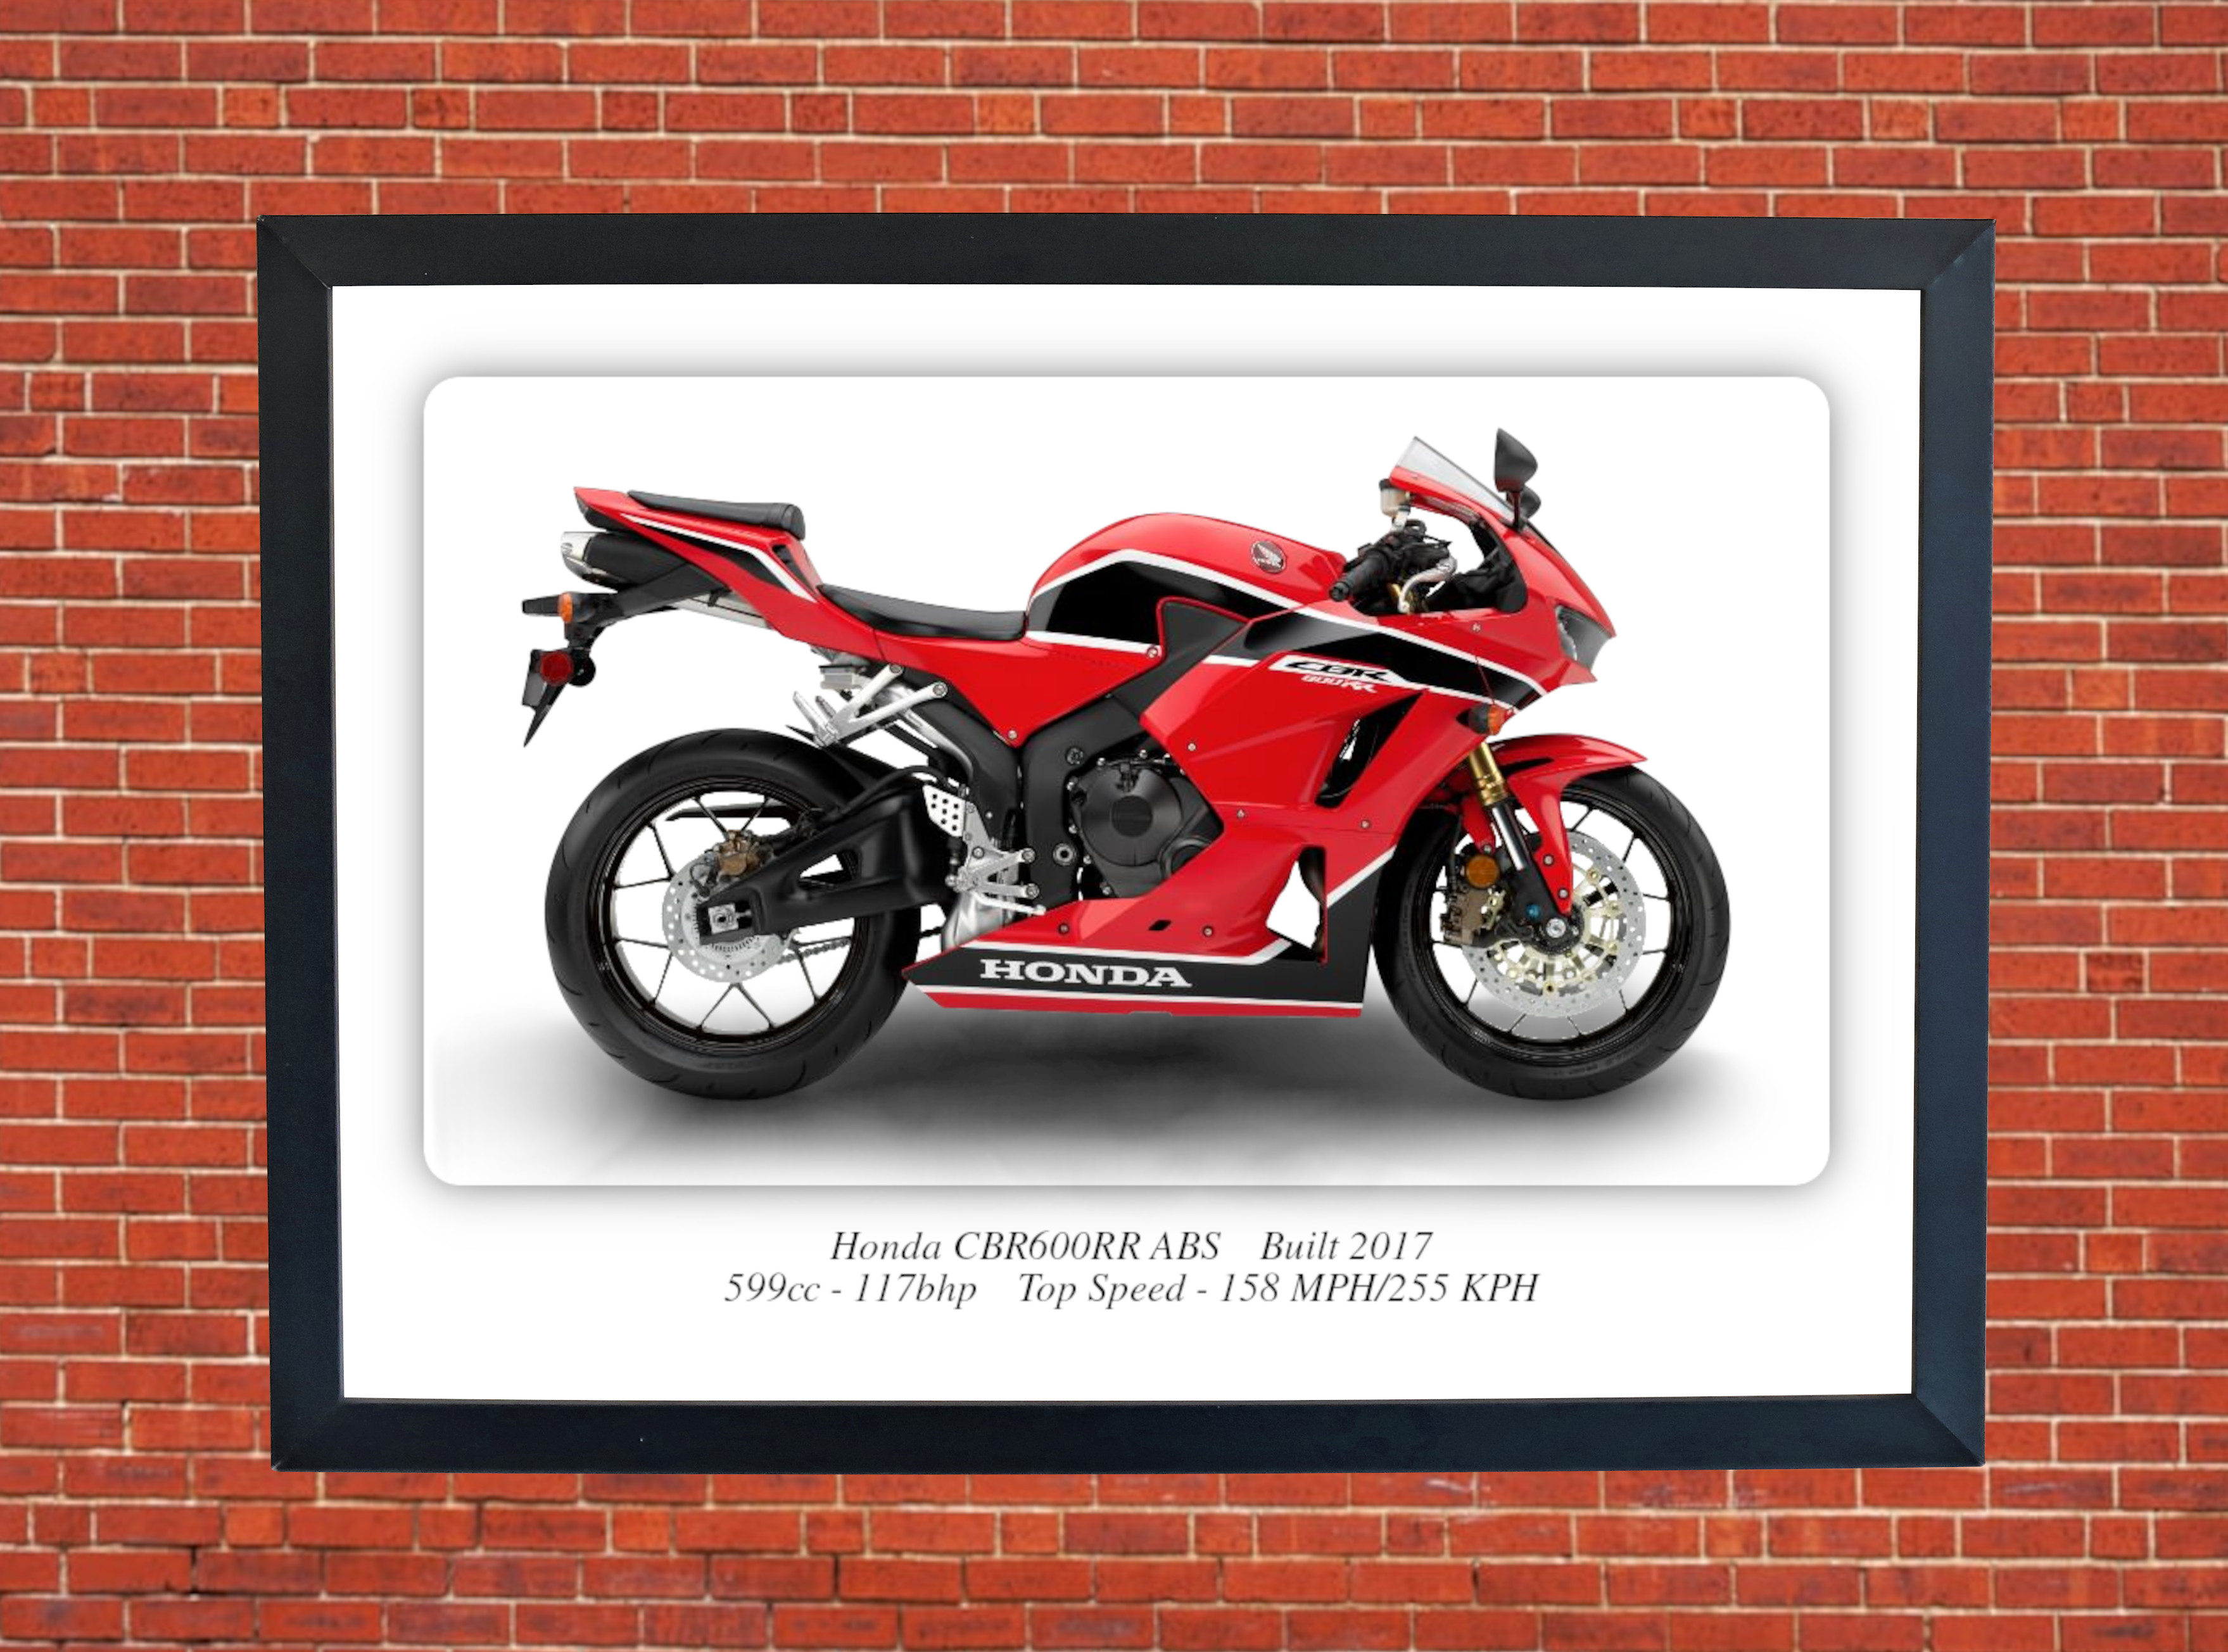 Honda CBR600RR ABS Motorbike Motorcycle - A3/A4 Size Print Poster